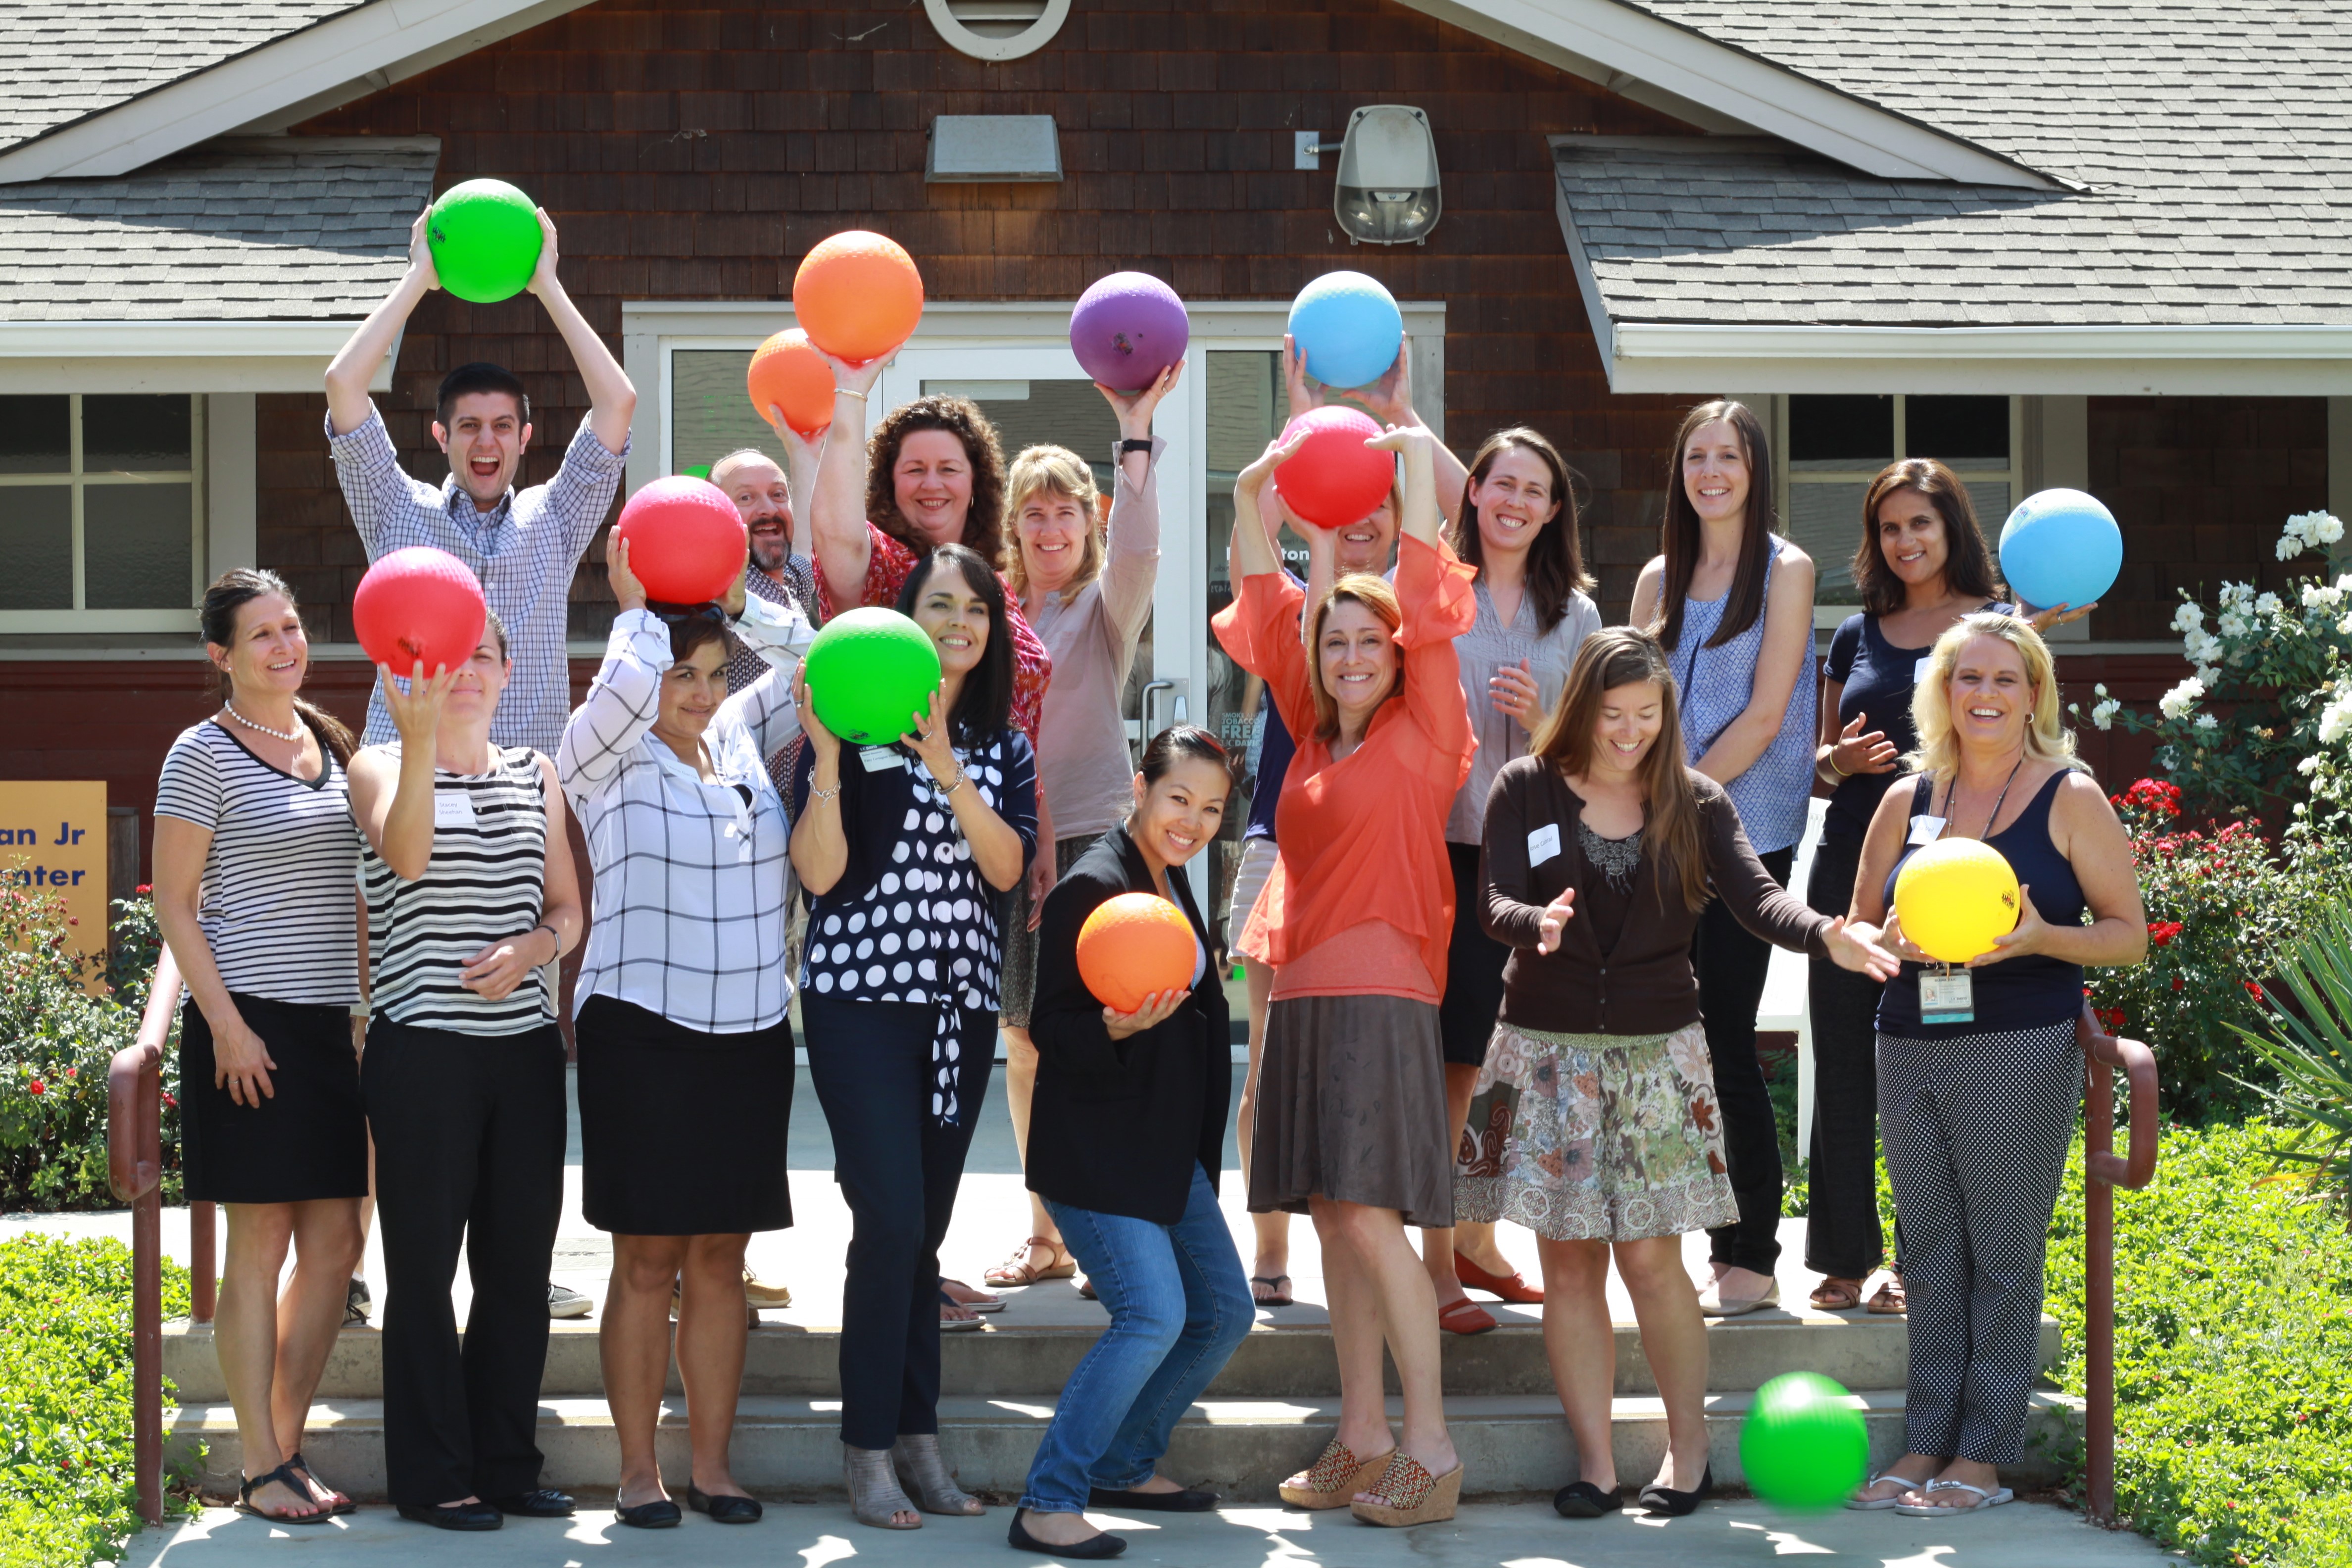 group of smiling people holding colorful balloons